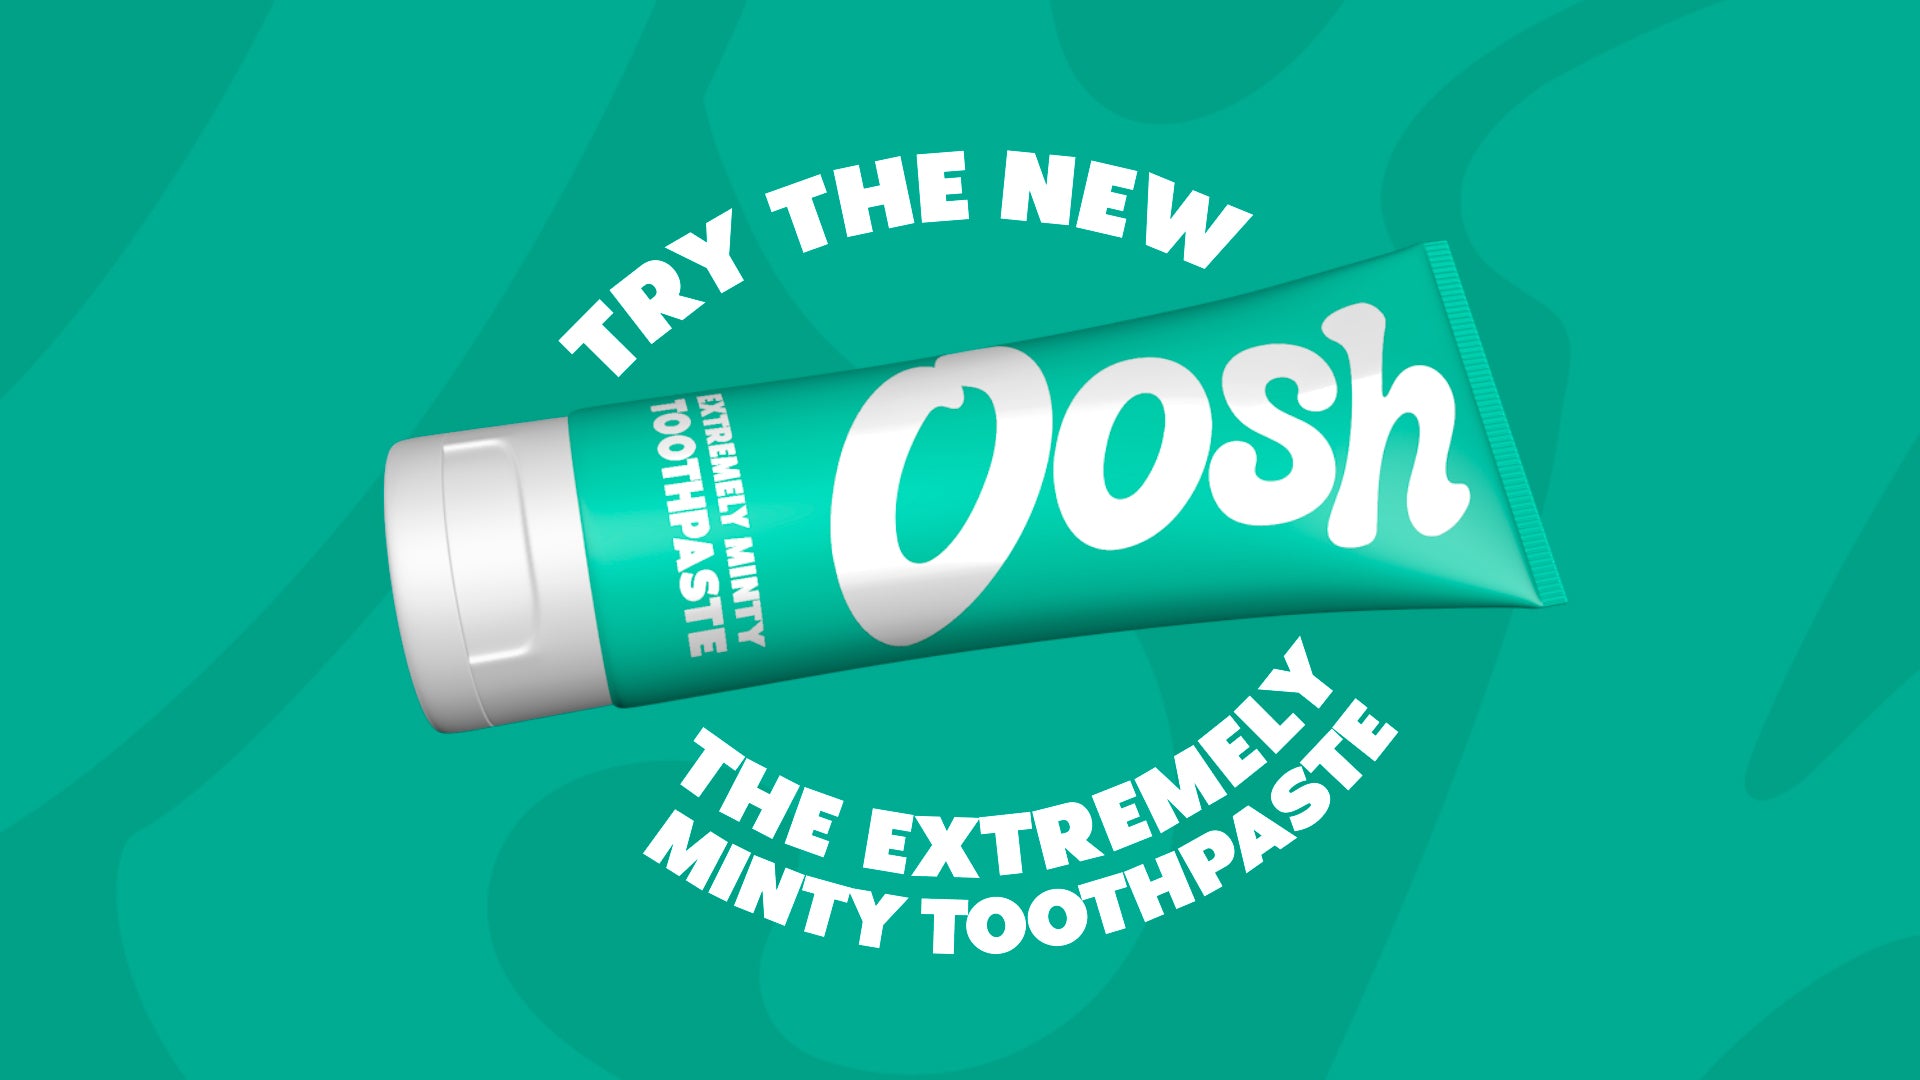 Load video: Stay minty with the whoosh of new extreme mint Oosh toothpaste